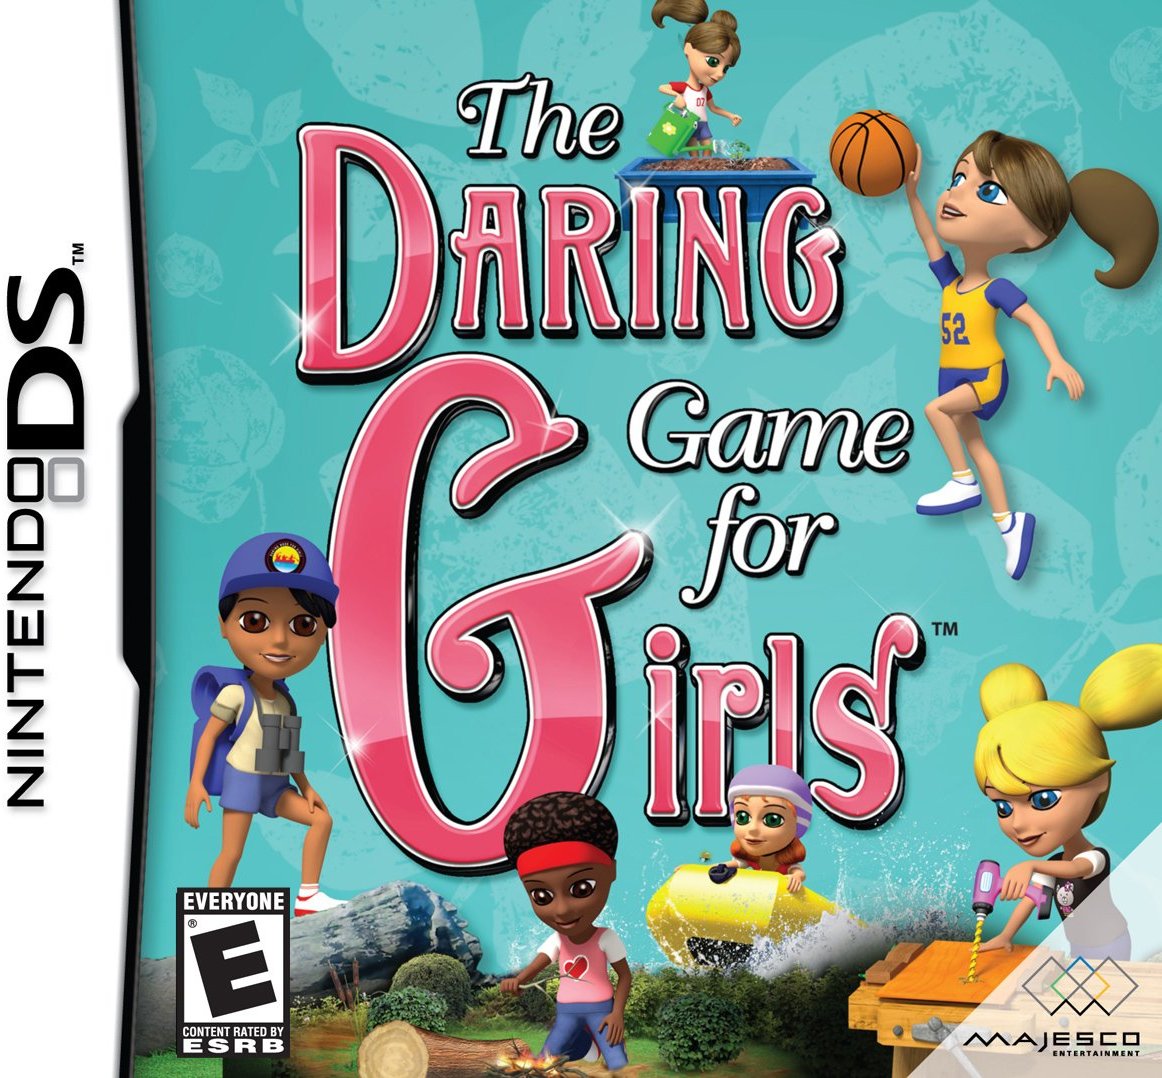 Daring Game for Girls, The faqs for Nintendo DS - The Video Games Museum.